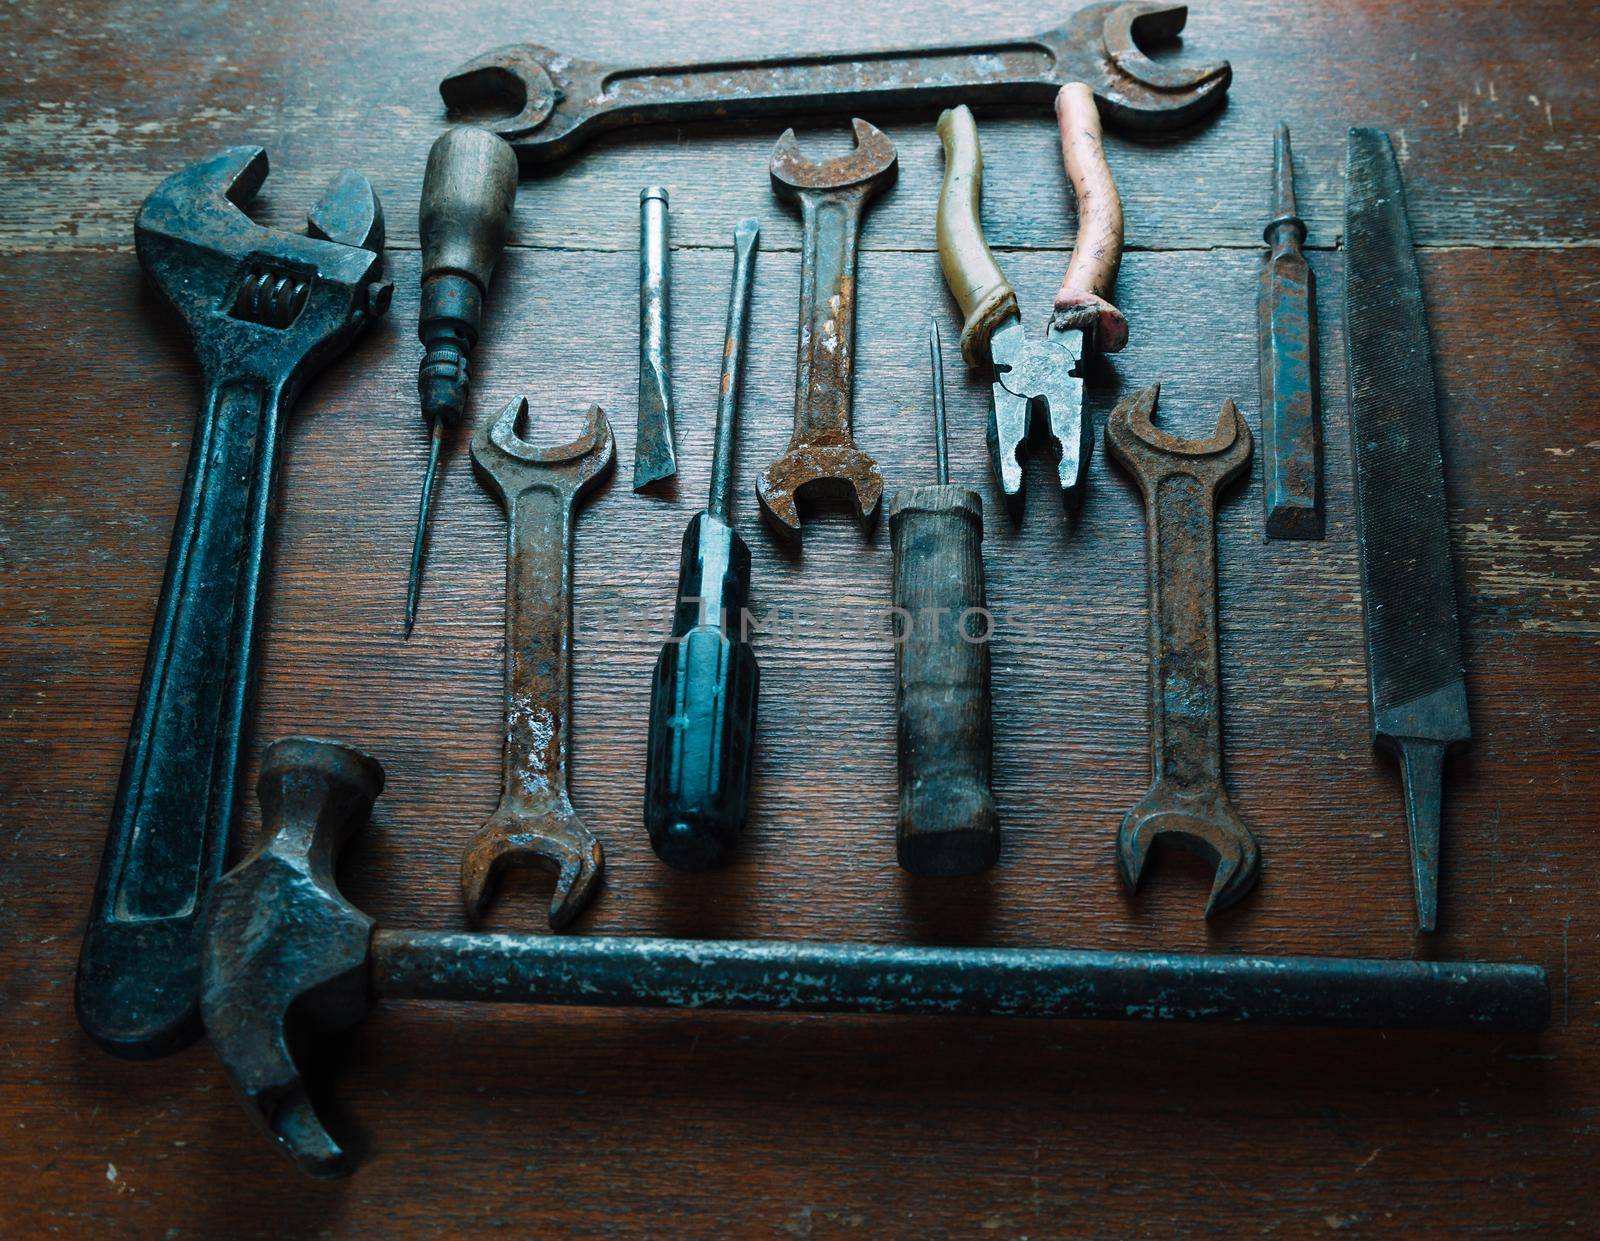 Set of old working tools on wooden surface, no people